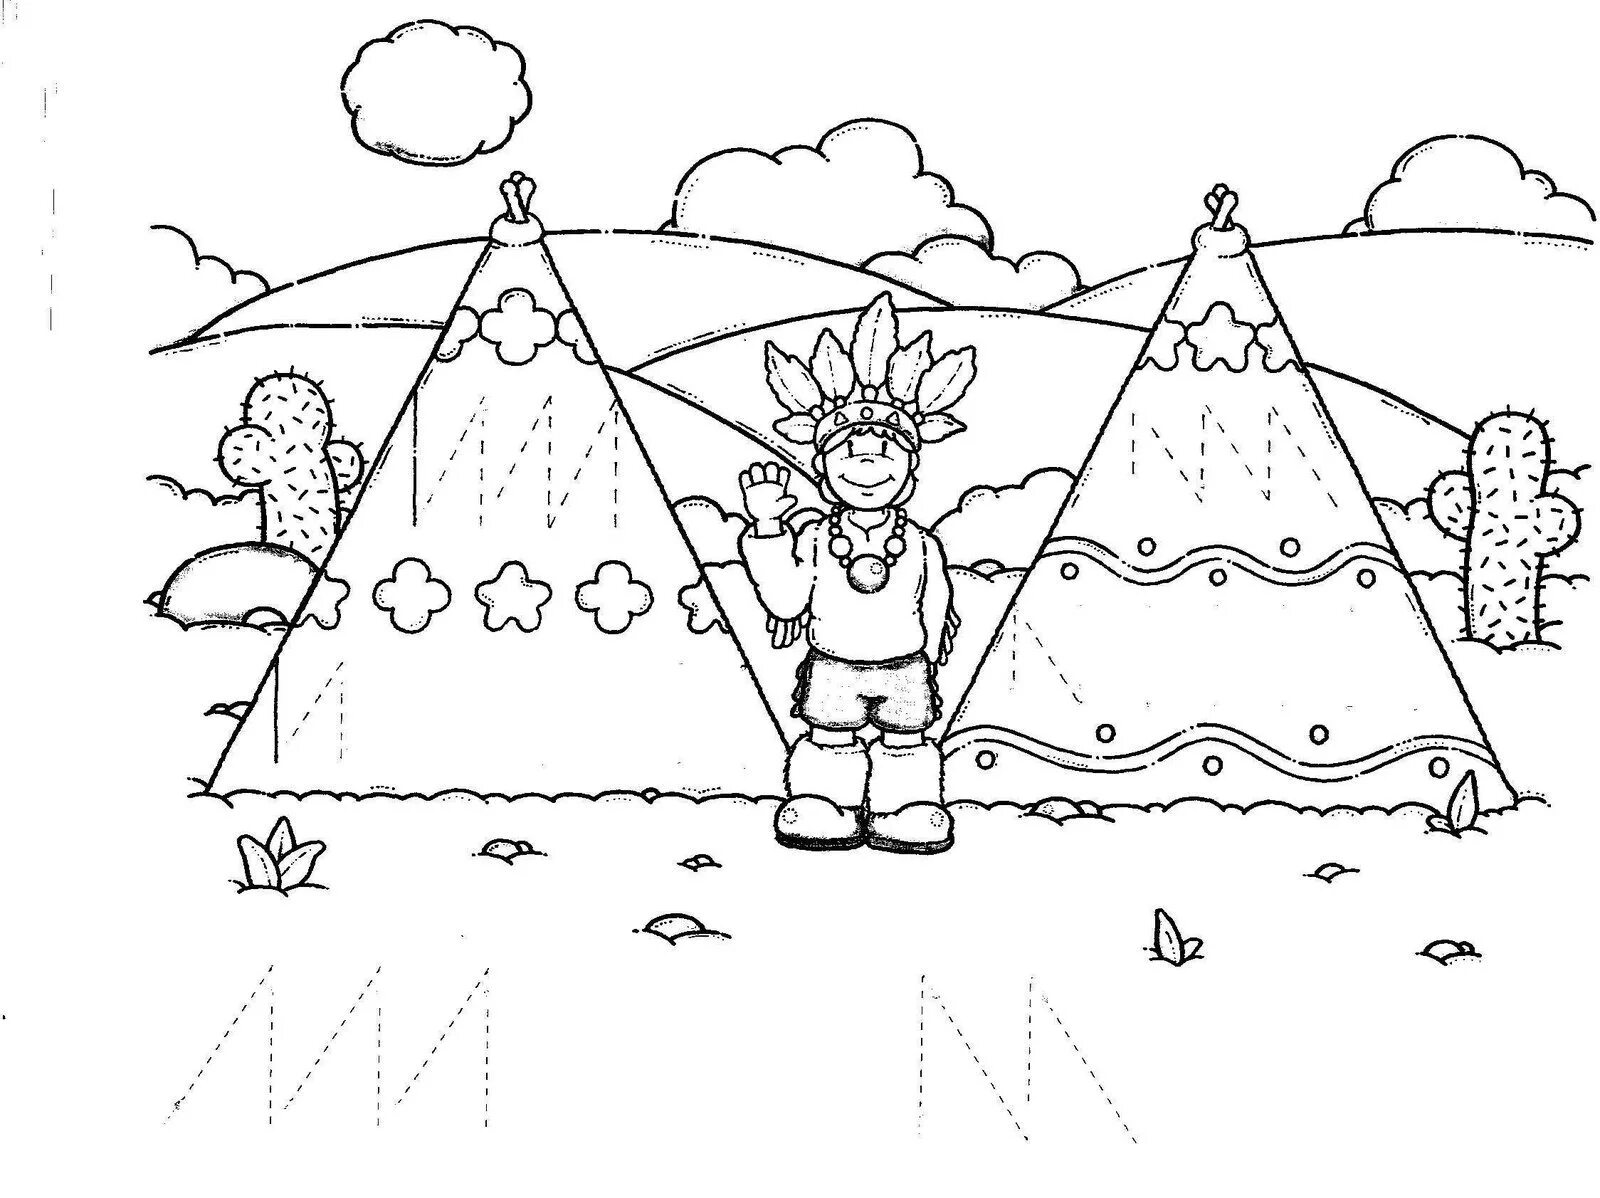 Charming Buddy Coloring Page for Juniors